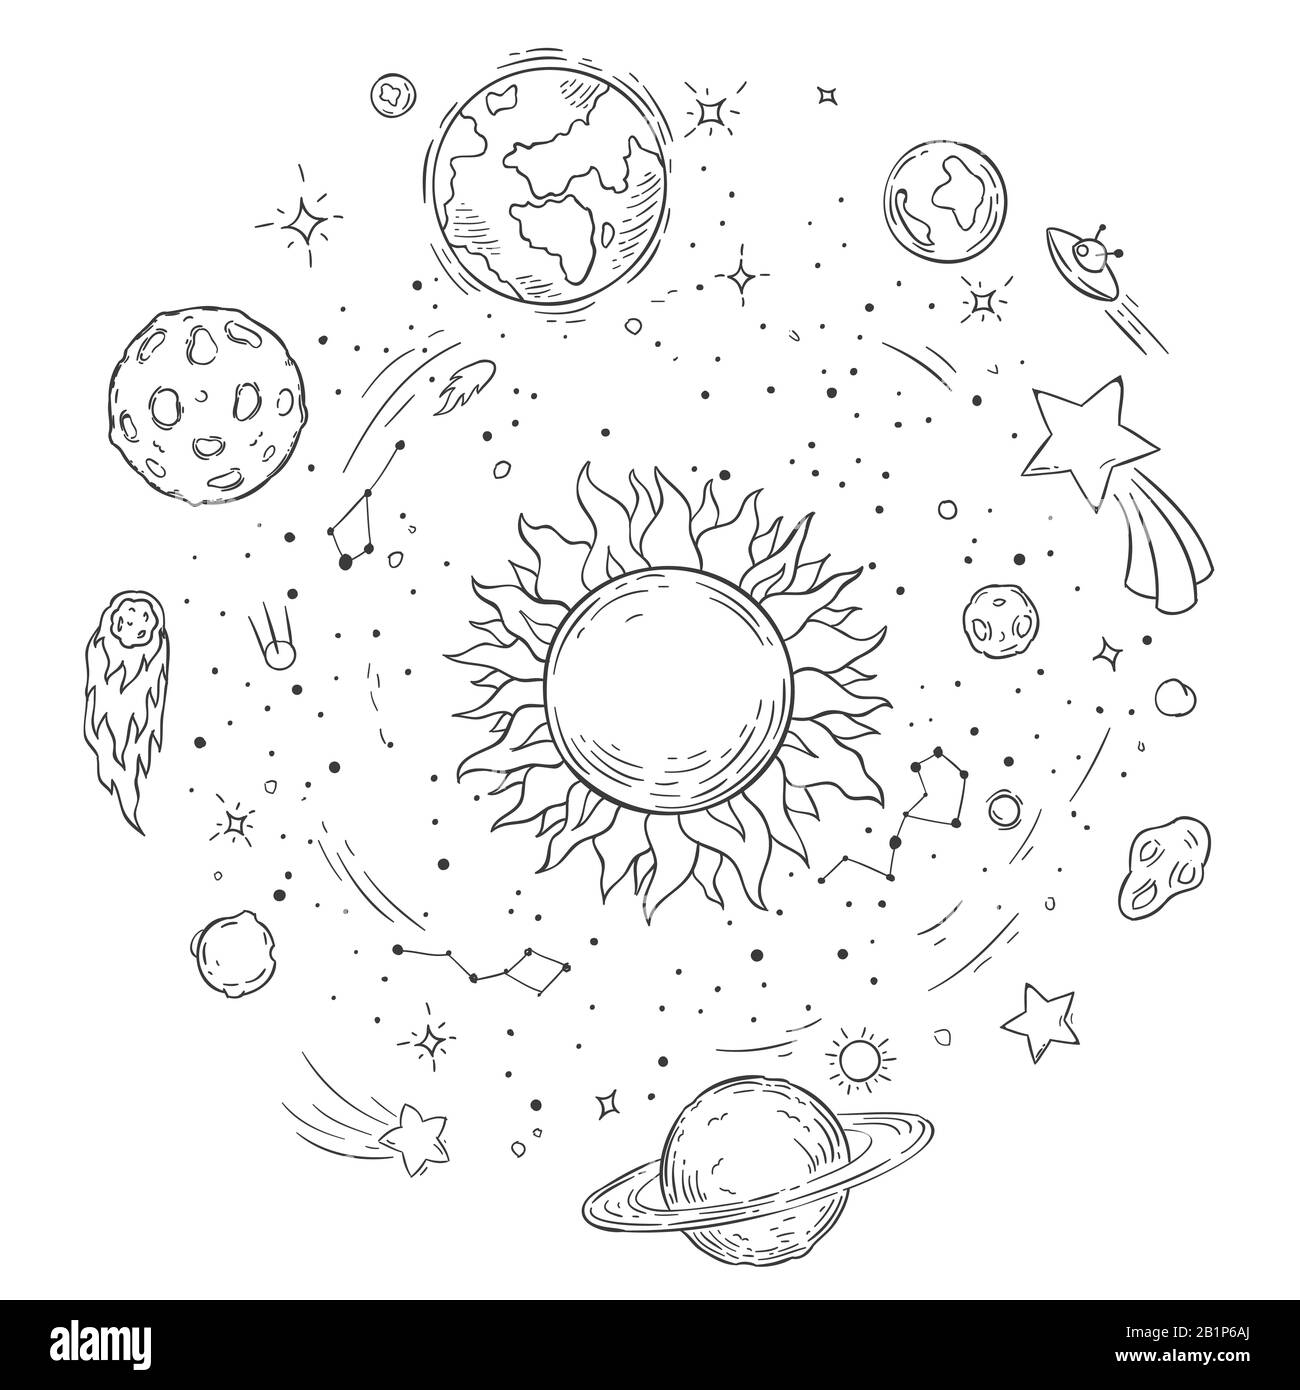 Doodle solar system. Hand drawn sun, cosmic comet and planet earth vector illustration. Outer space monochrome coloring book drawing. Celestial bodies Stock Vector